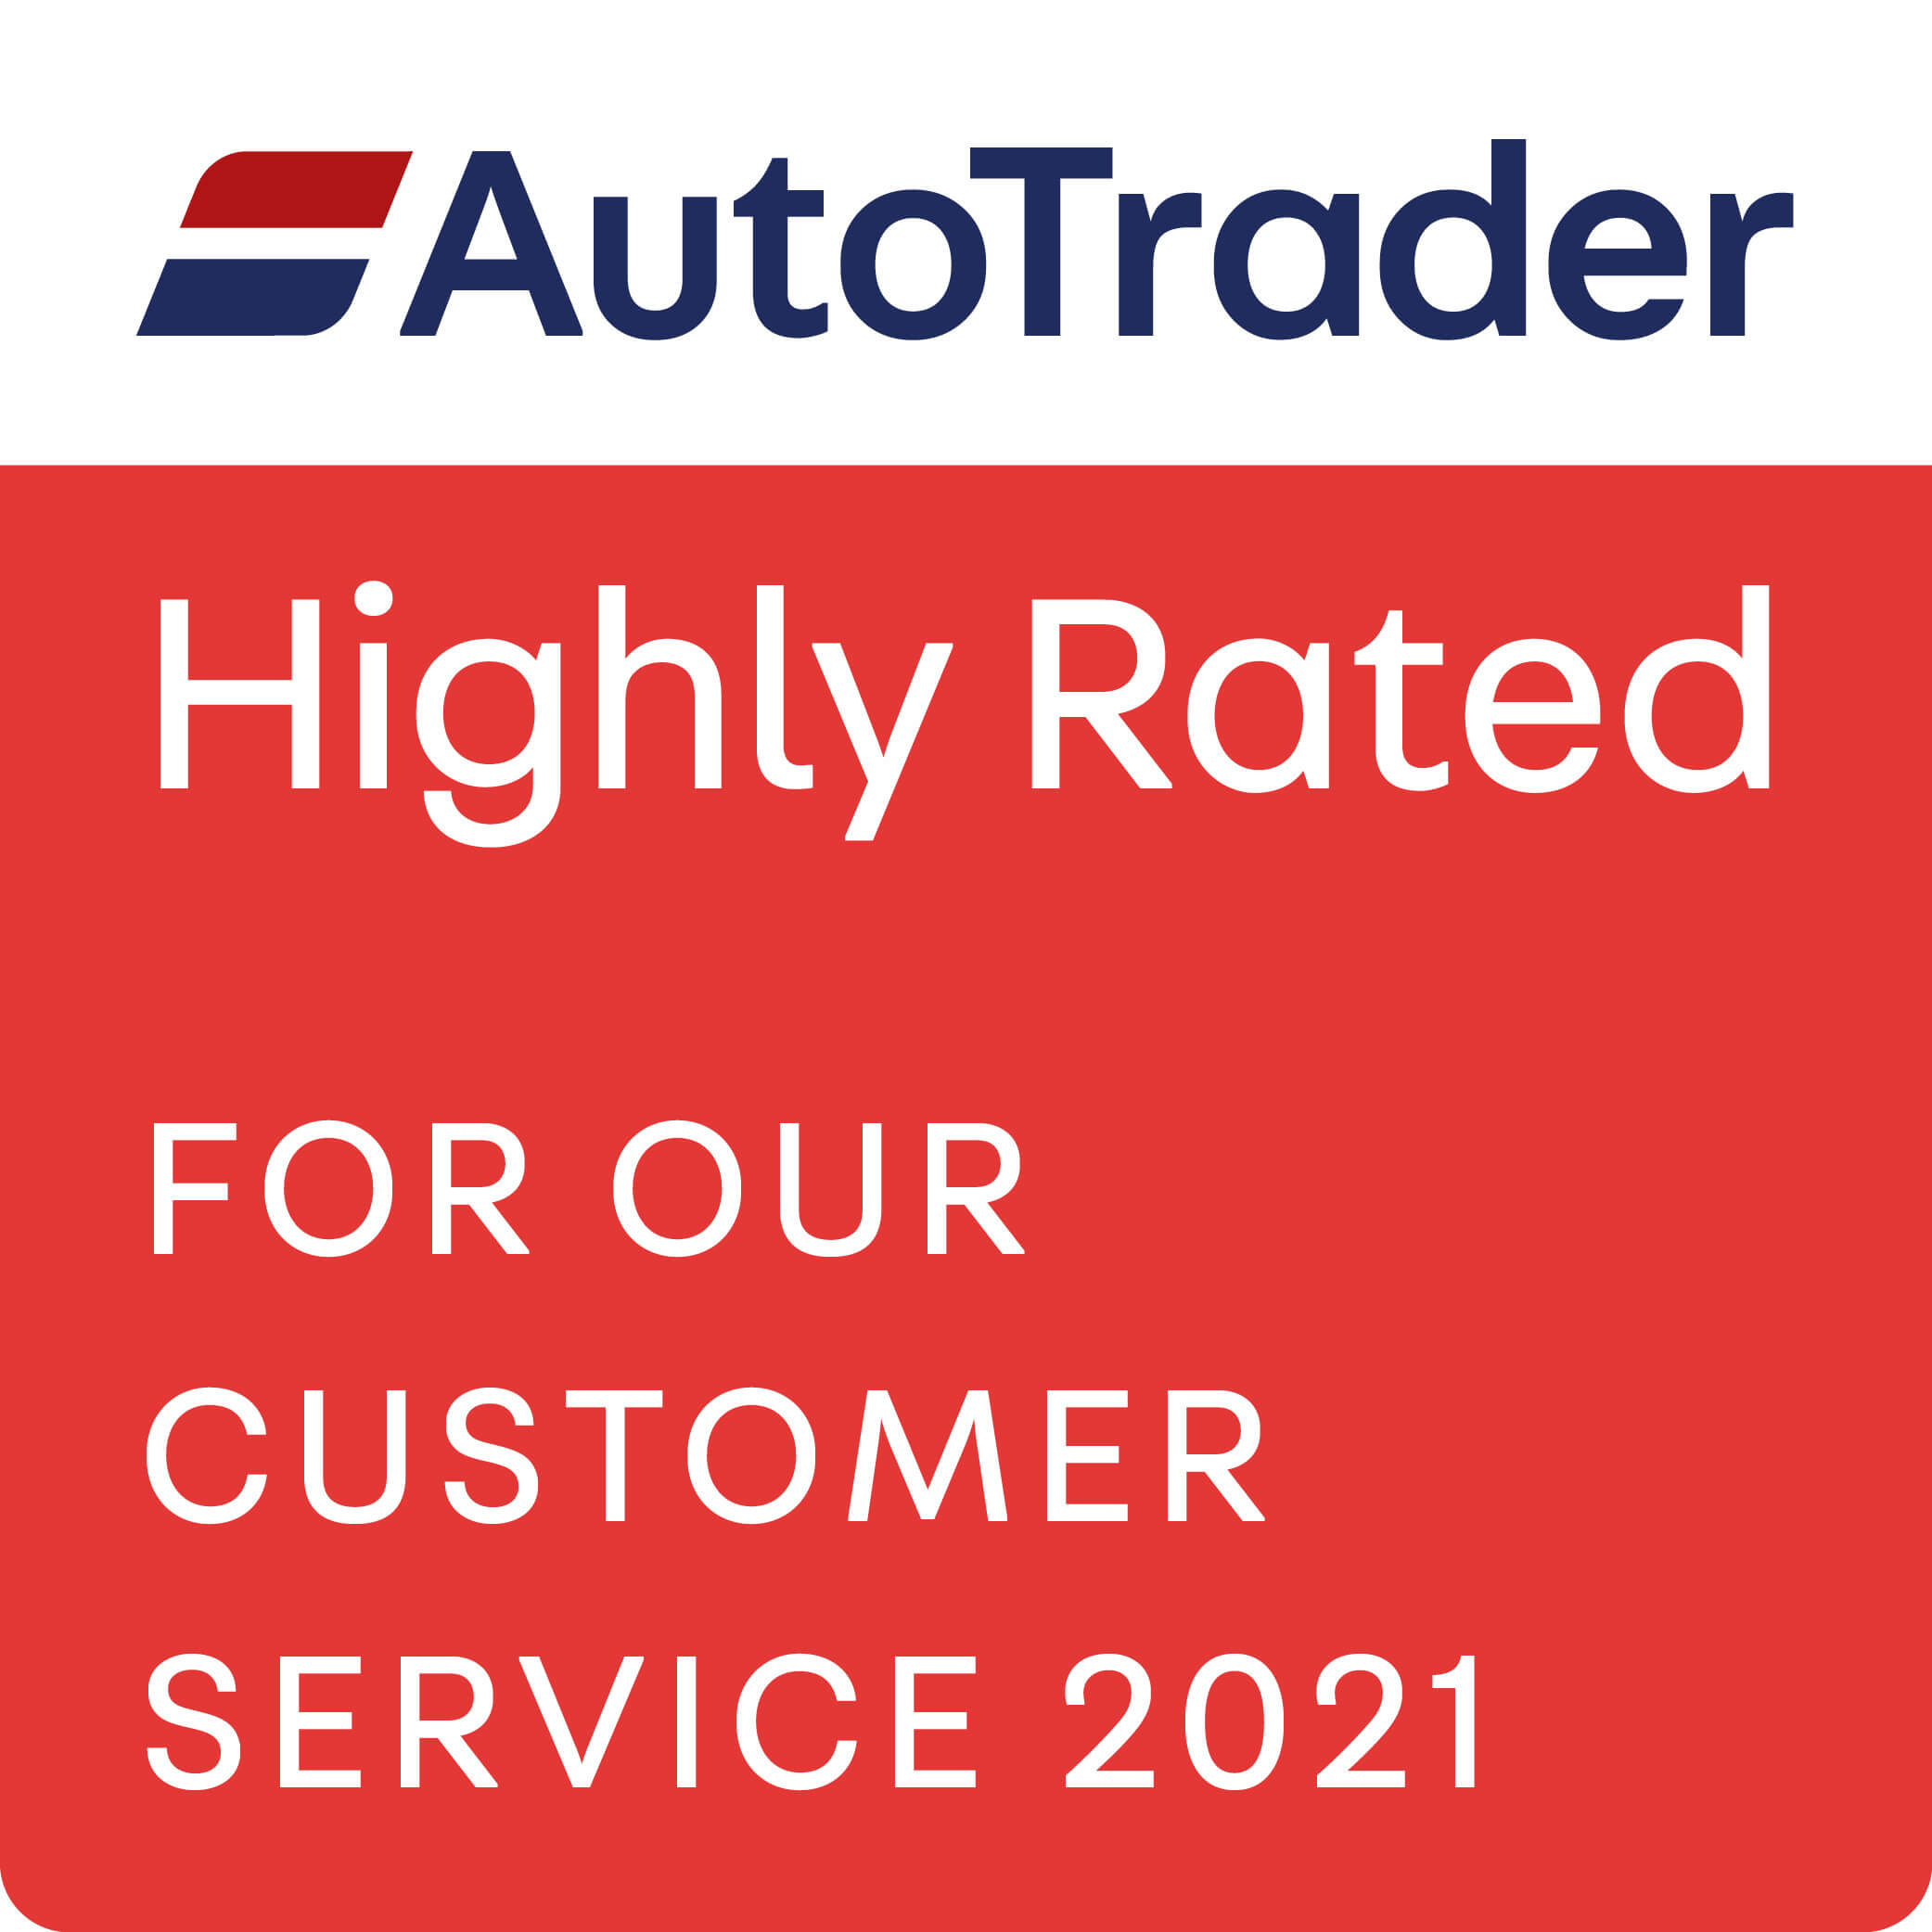 Highly Rated for Customer Service 2021 - Auto Trader